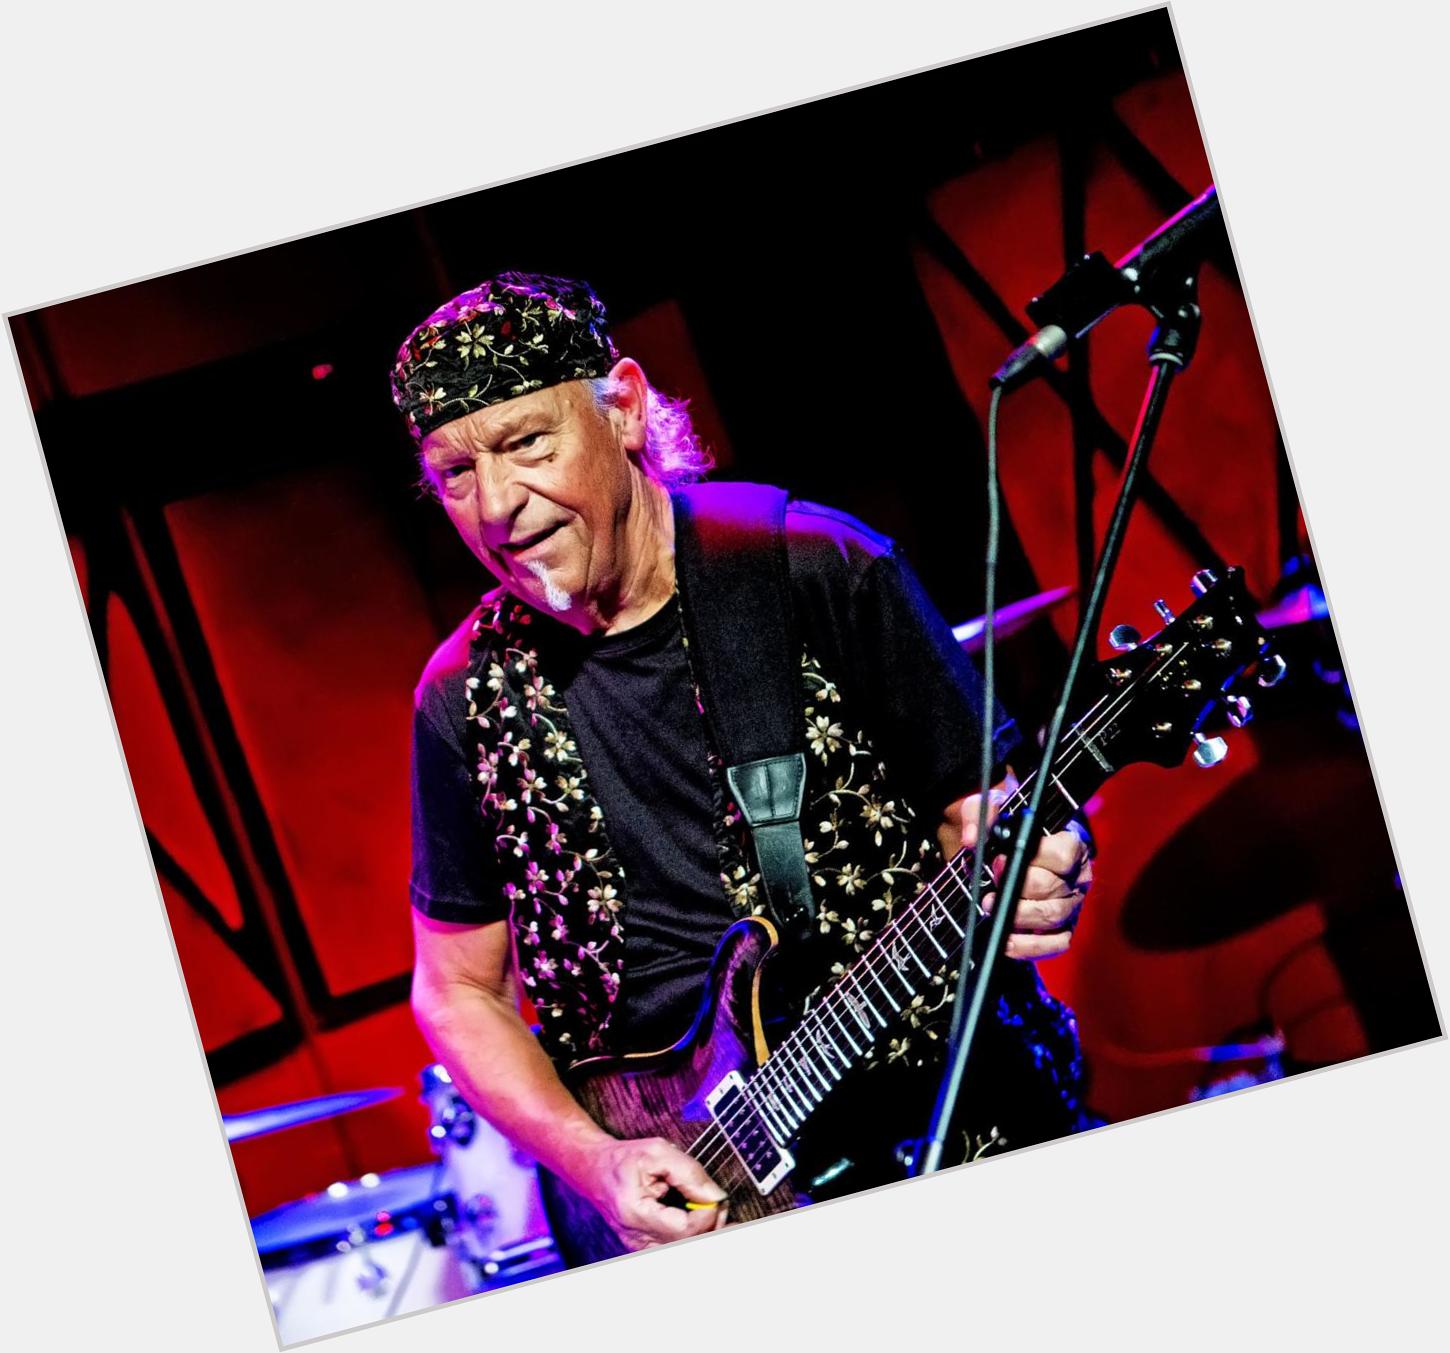 Martin Barre hairstyle 3